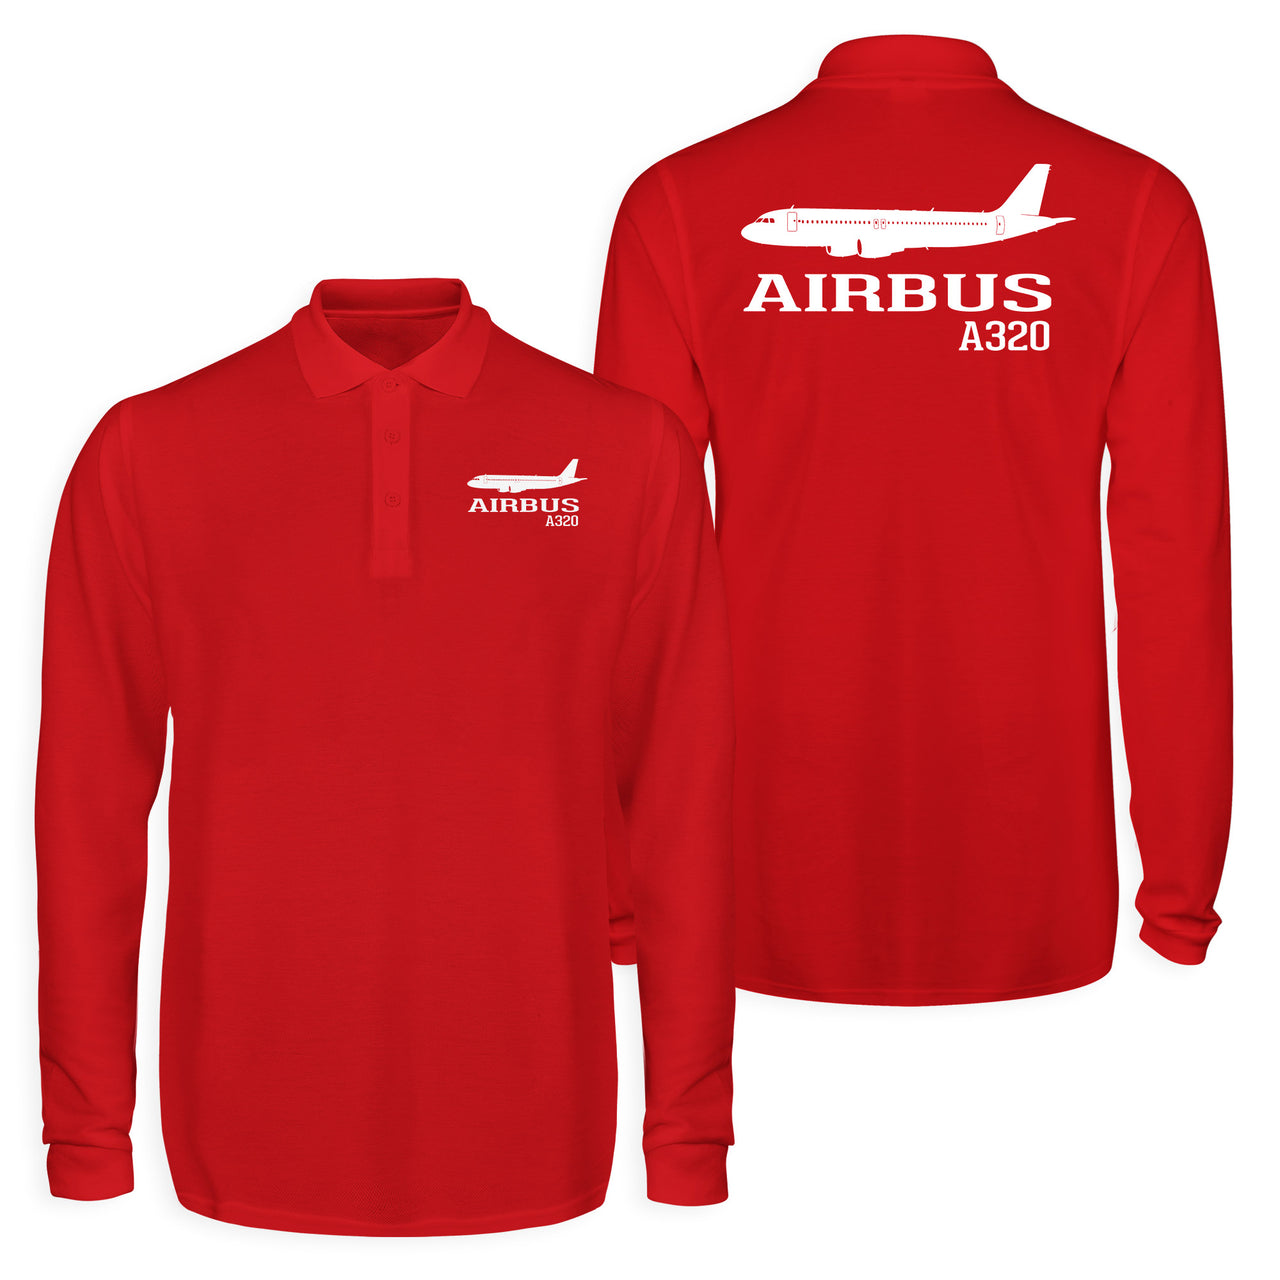 Airbus A320 Printed Designed Long Sleeve Polo T-Shirts (Double-Side)